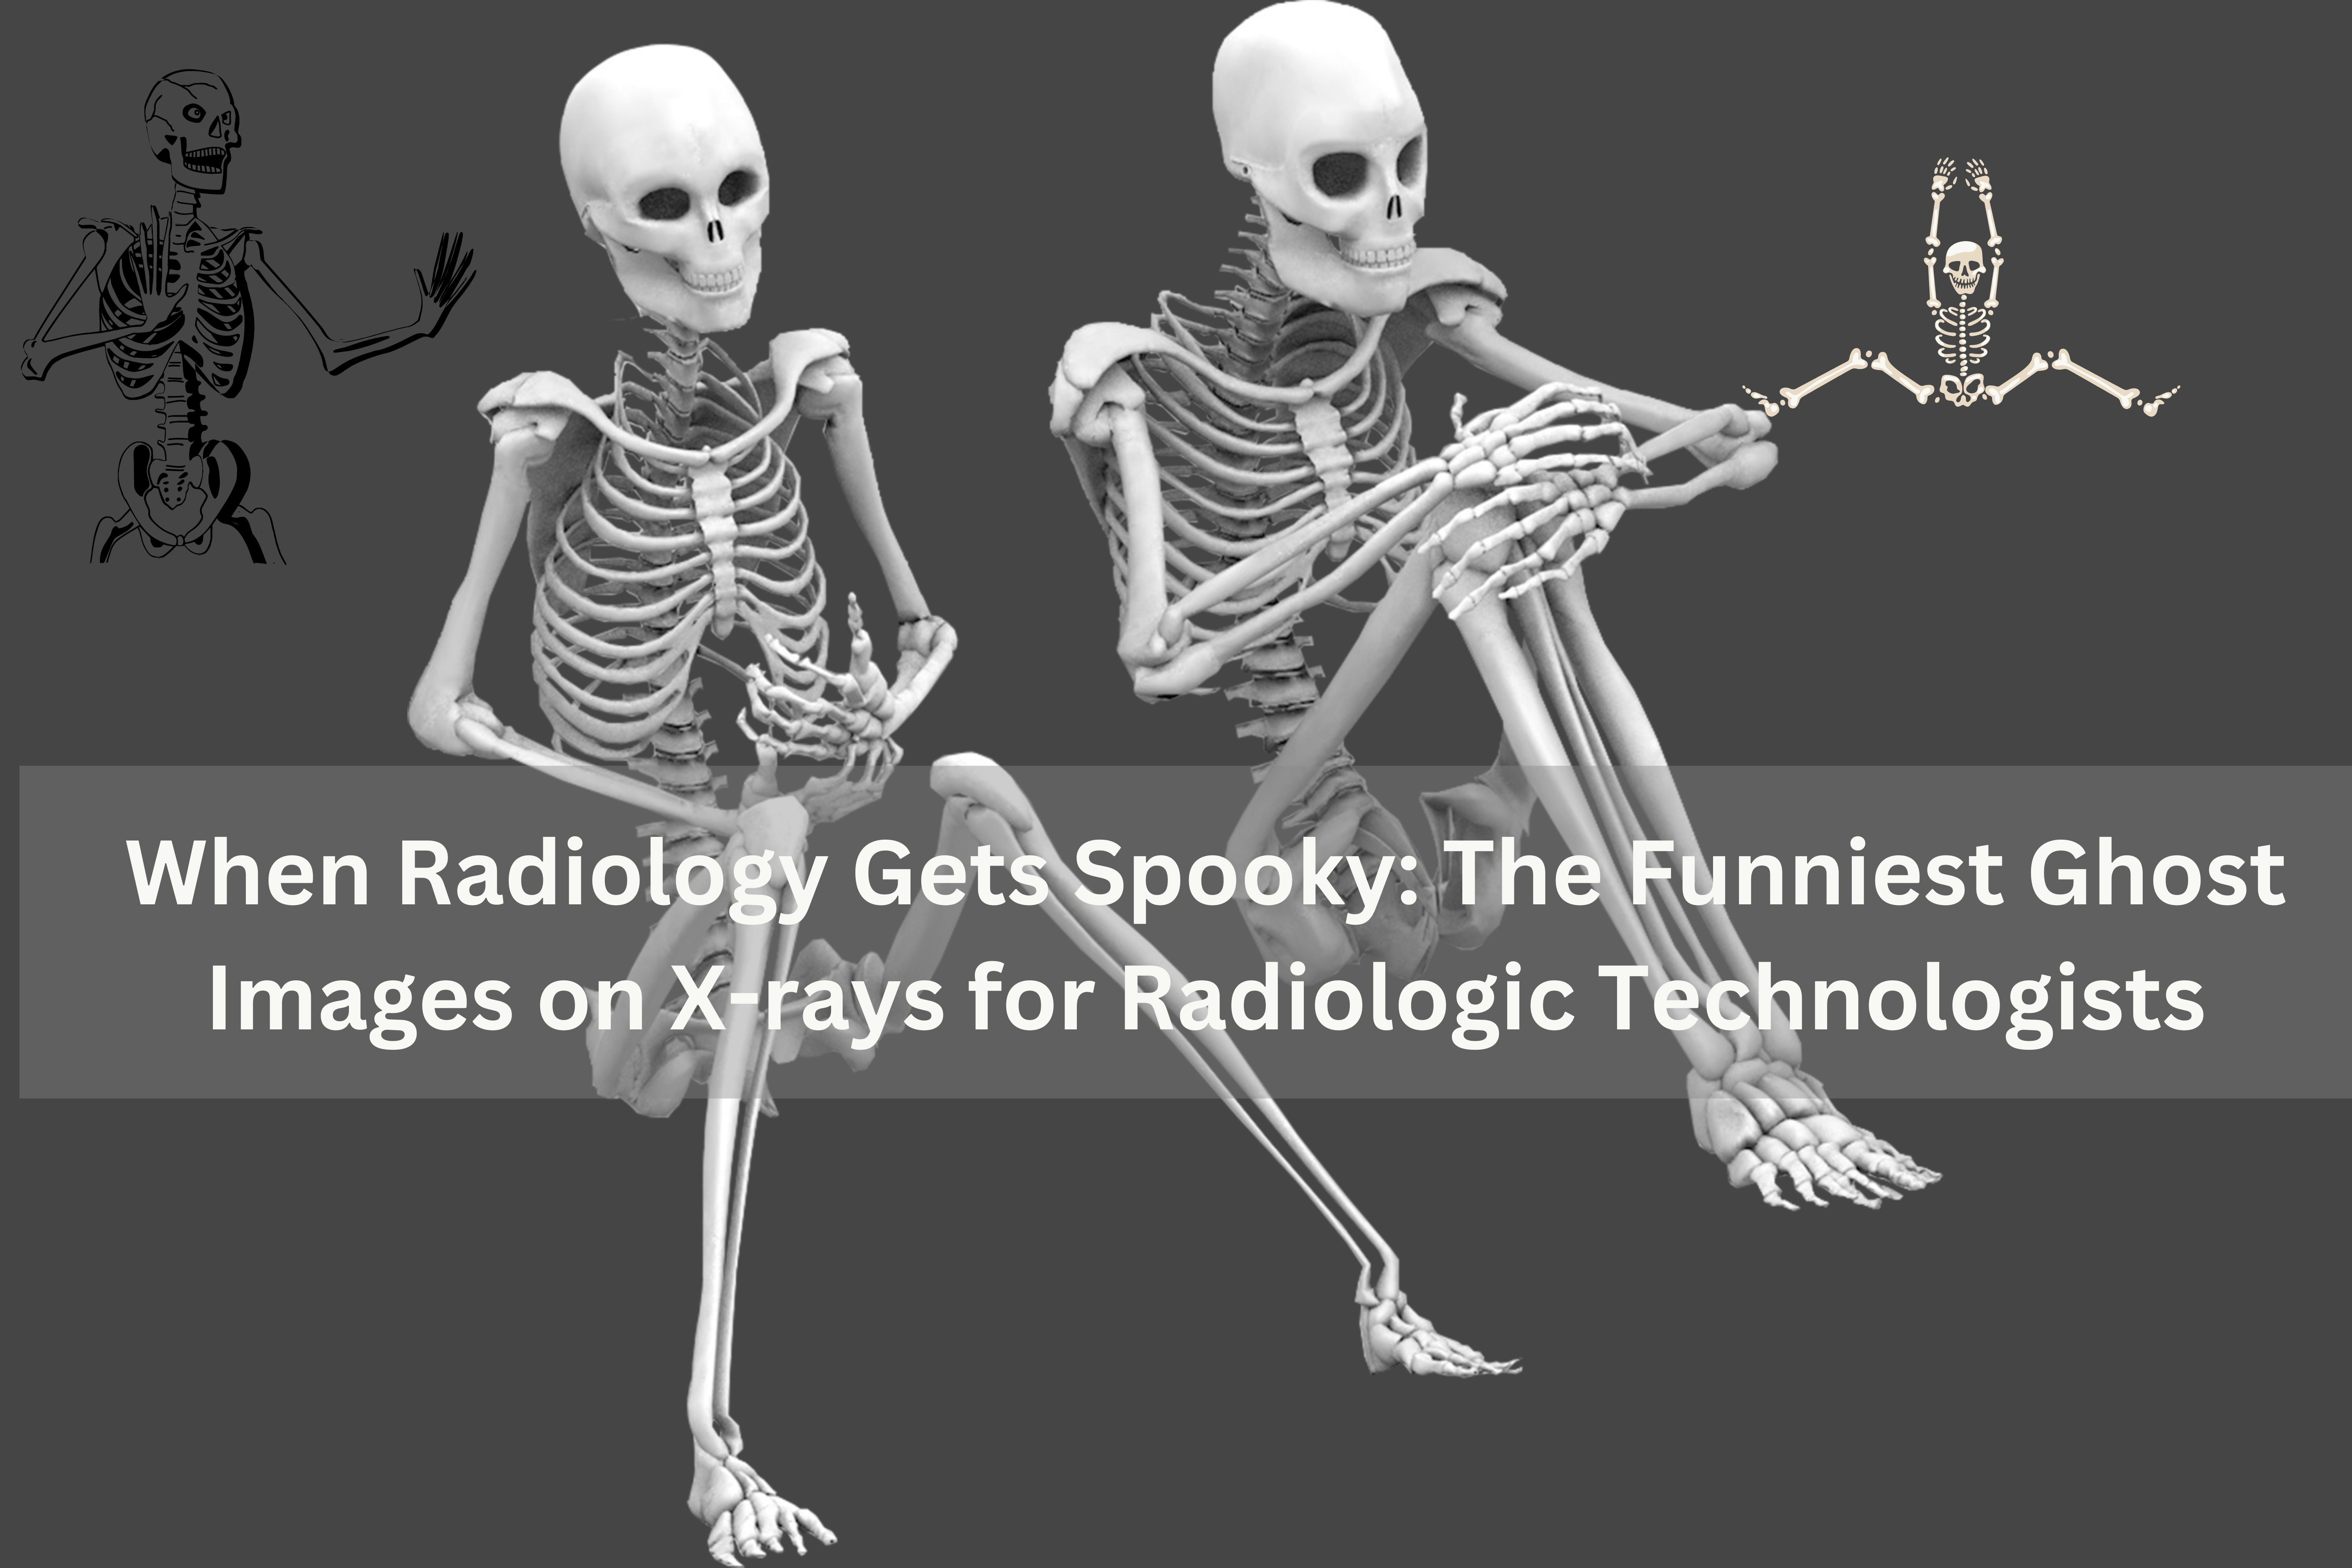 When Radiology Gets Spooky: The Funniest Ghost Images on X-rays for Radiologic Technologists